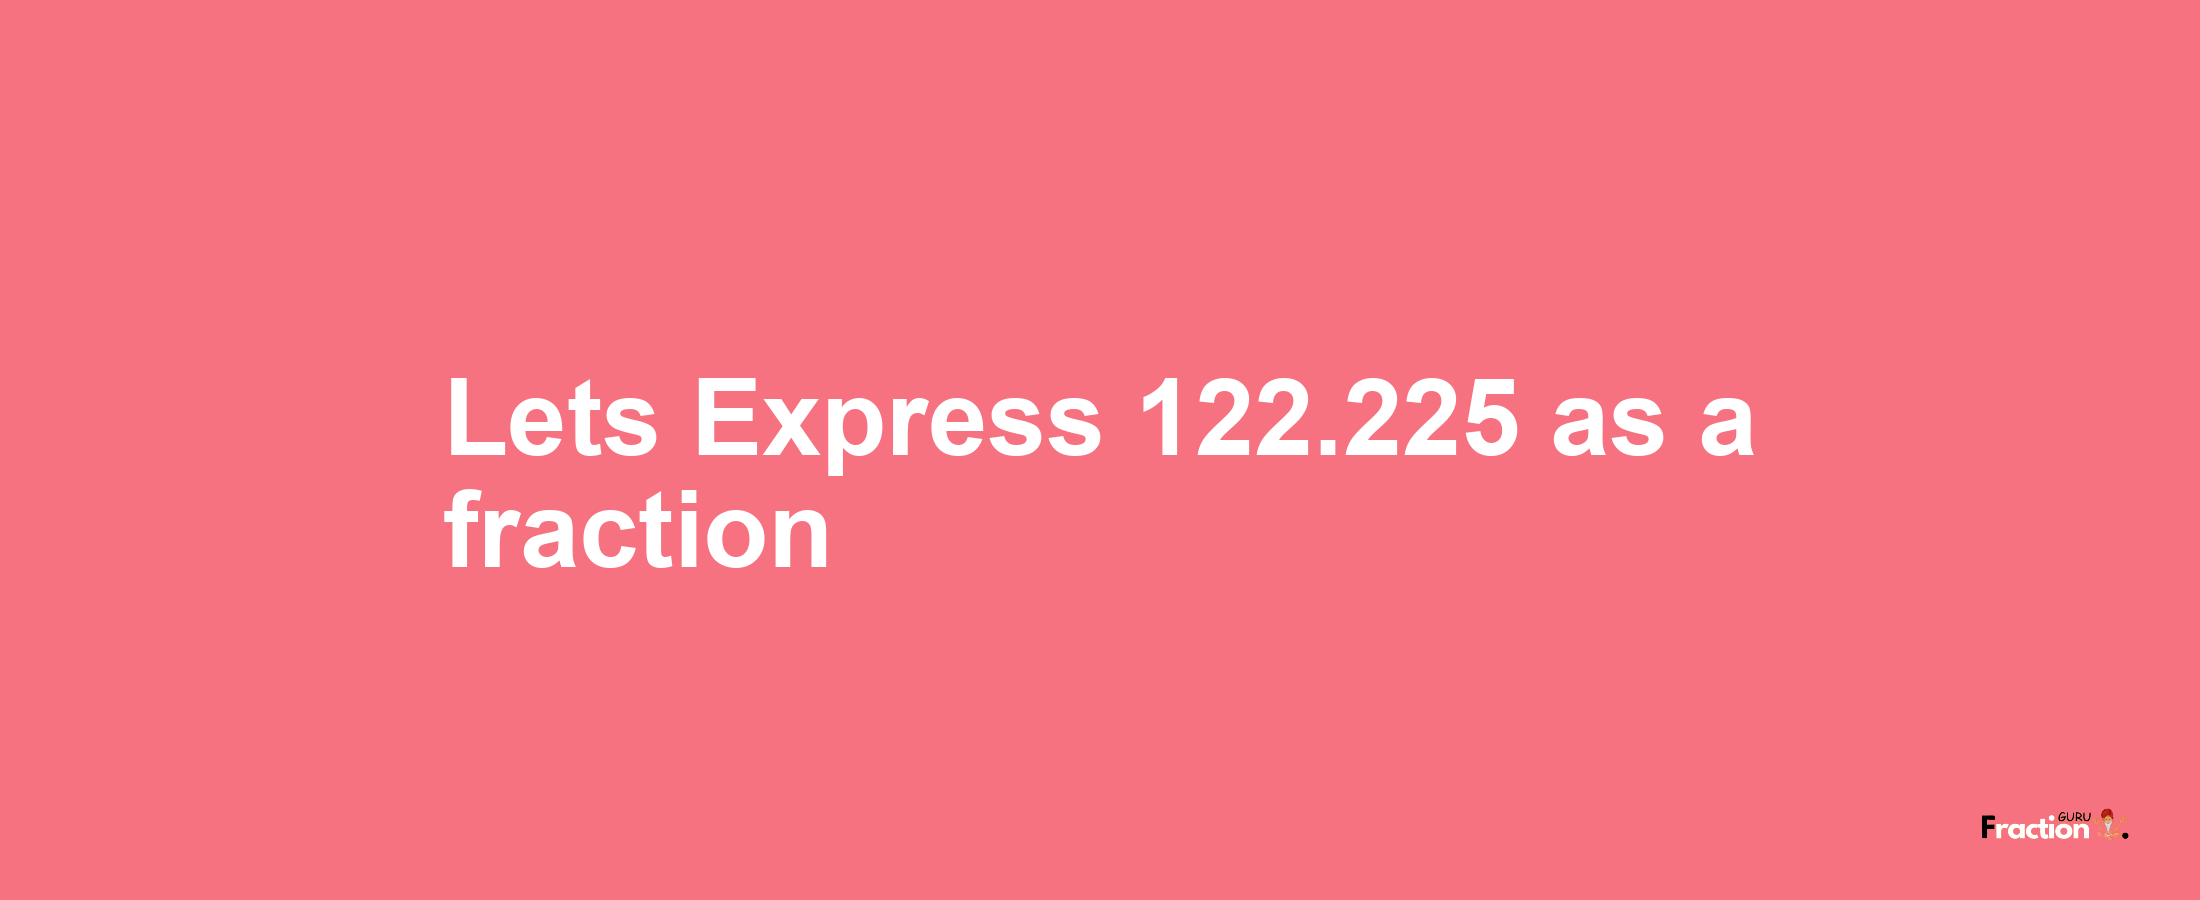 Lets Express 122.225 as afraction